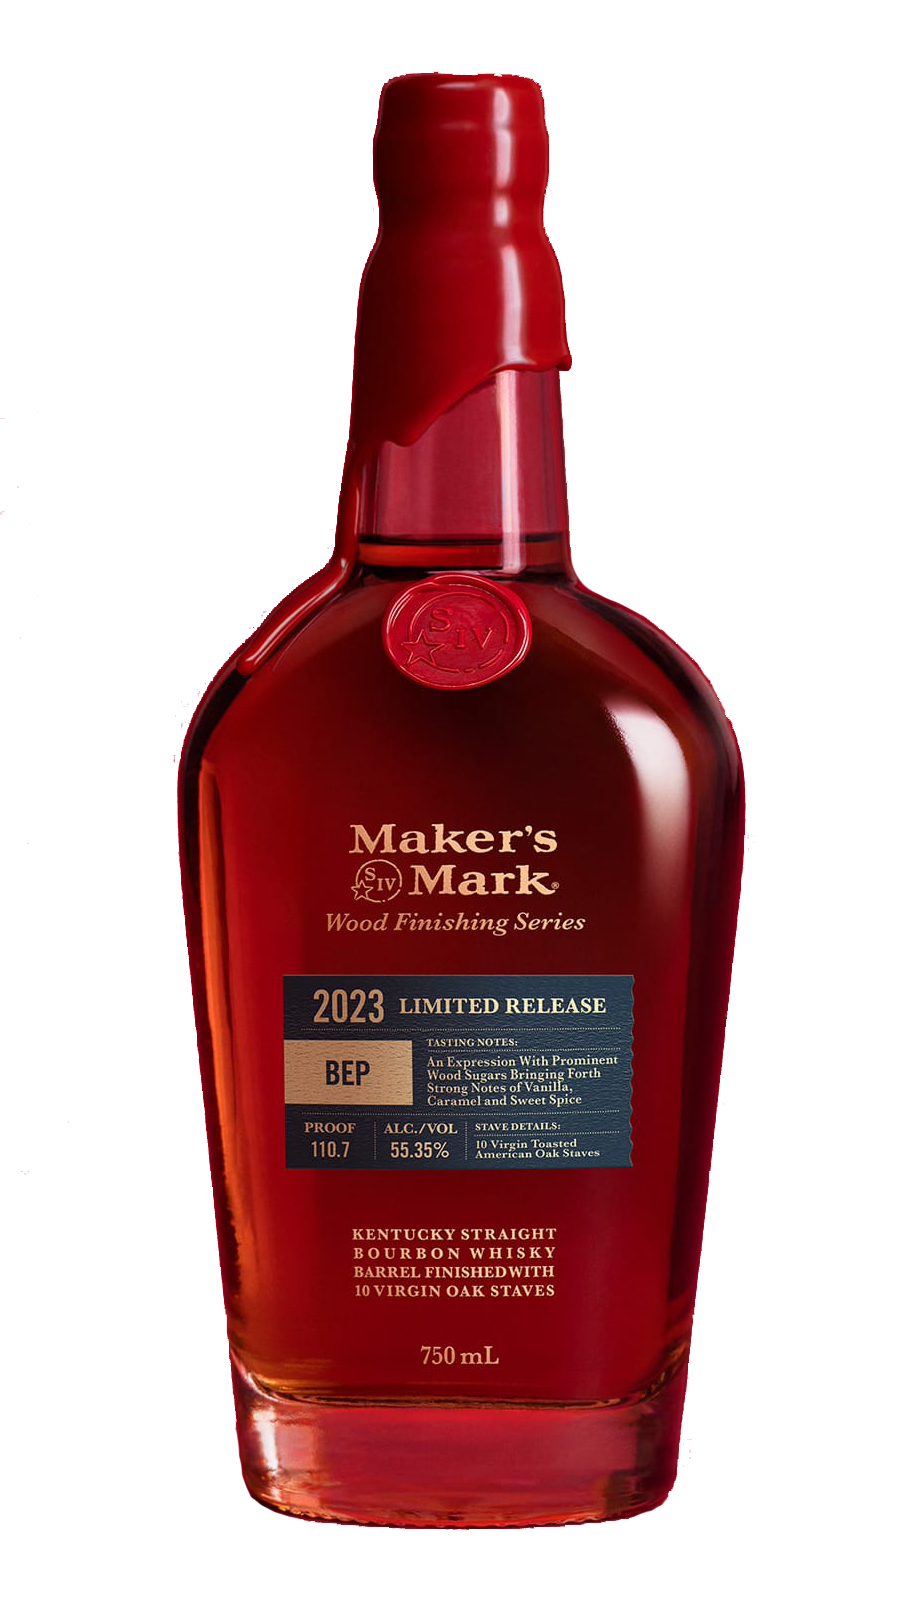 MAKERS MARK WHISKEY WOOD FINISHING SERIES BEP 2023 LIMITED RELEASE KENTUCKY 750ML - Remedy Liquor